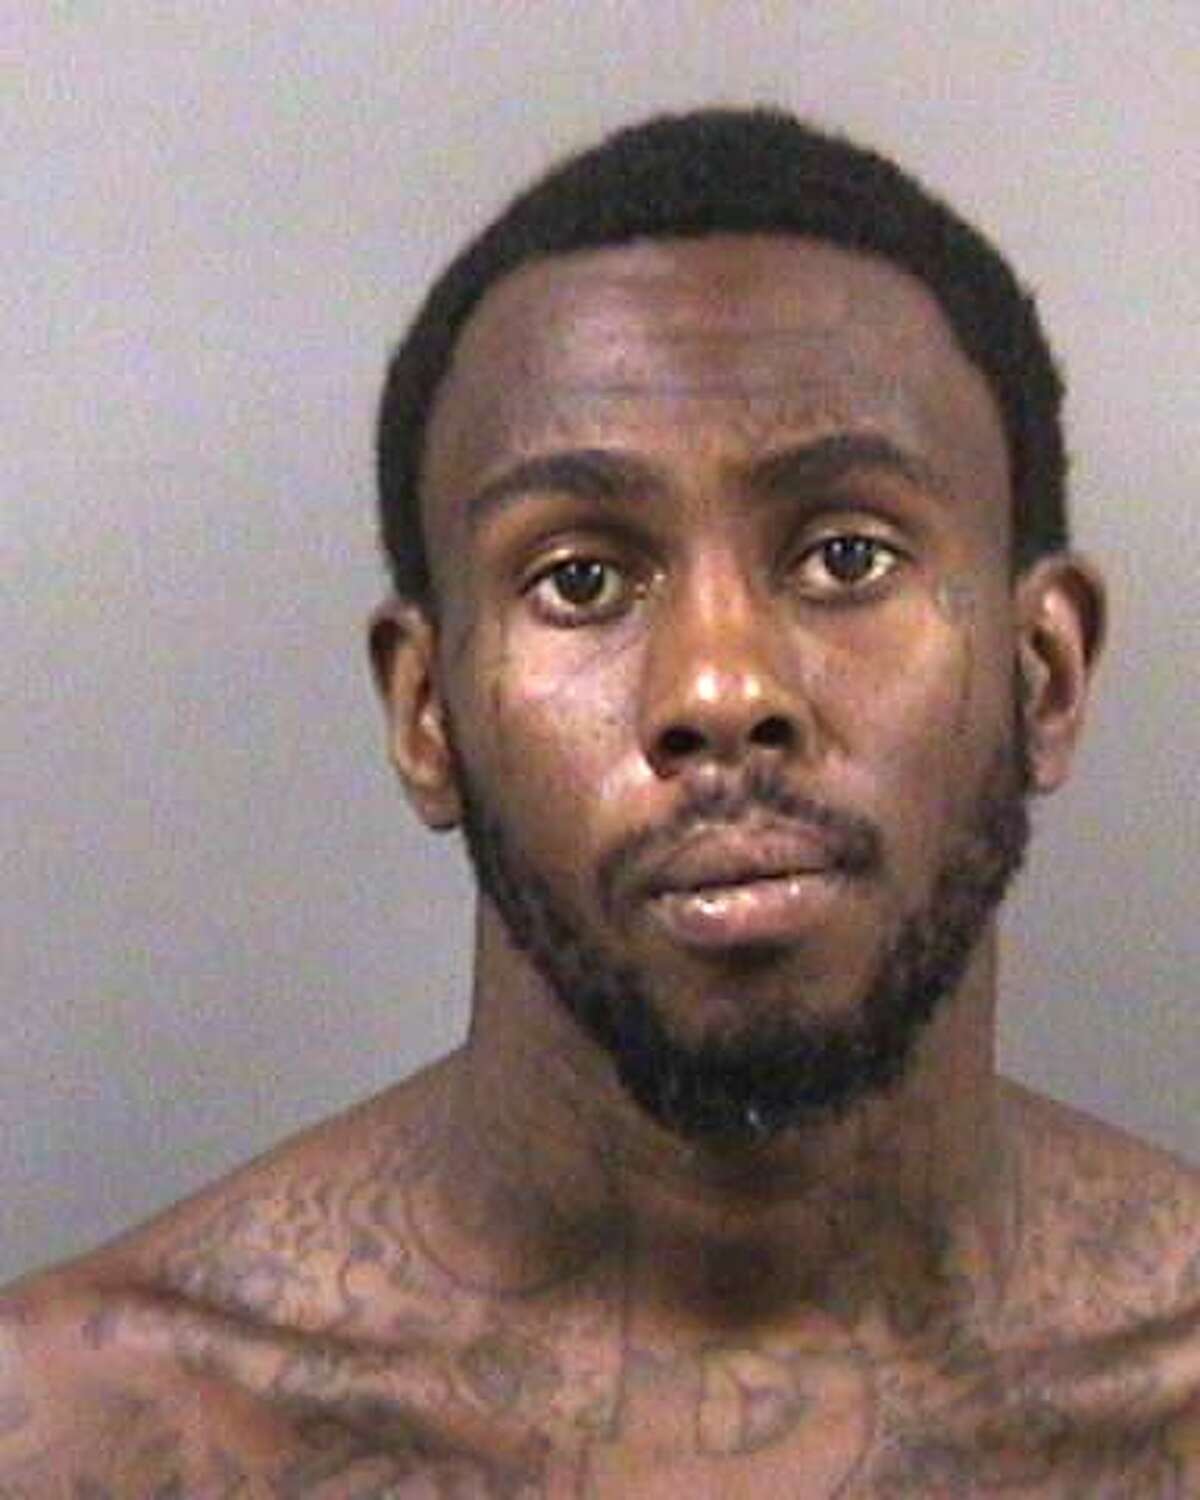 Darnell Williams is accused of murder and attempted murder in an Oakland shooting that left Alaysha Taylor, 8, dead on July 17, 2013.